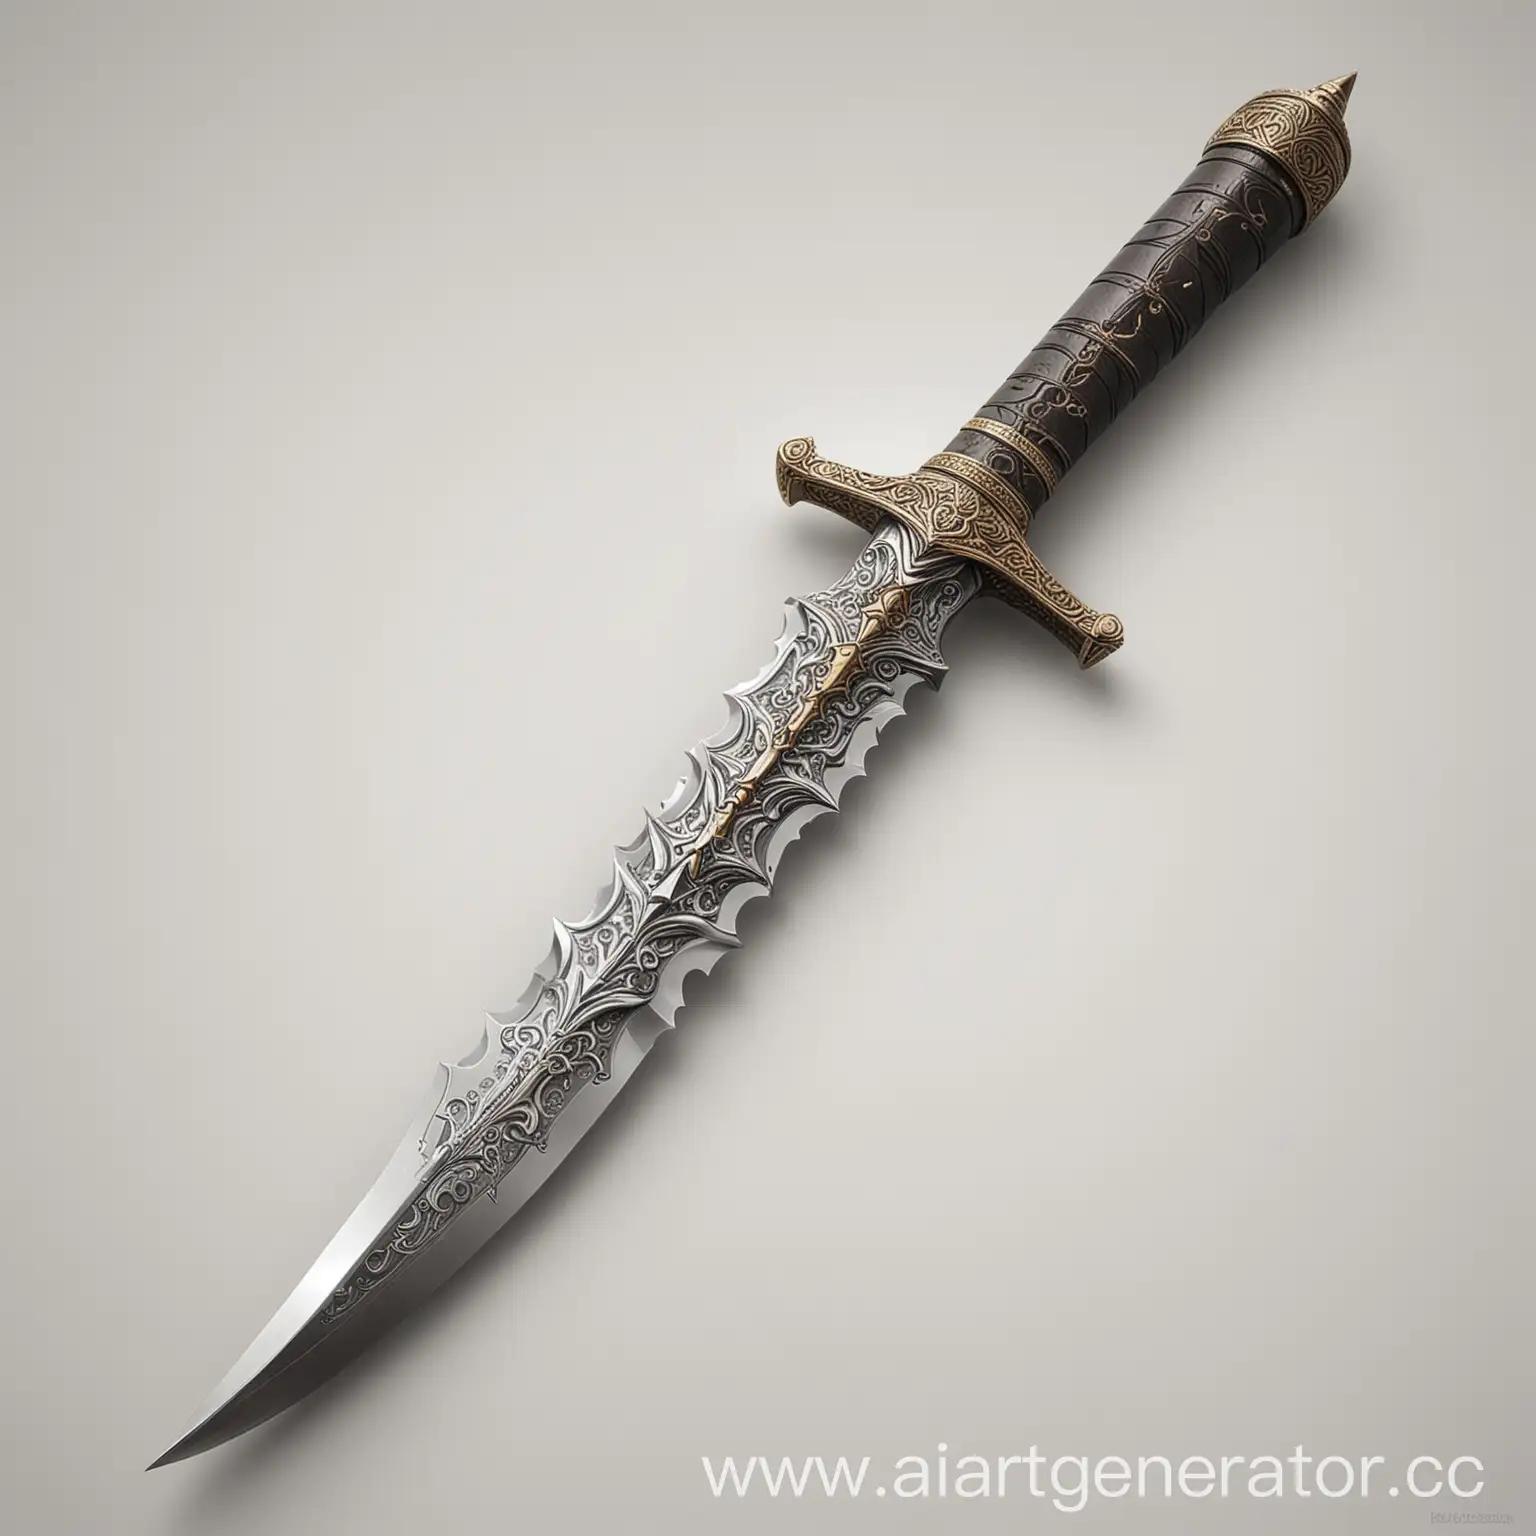 Realistic-Dagger-with-Serrated-Blade-on-White-Background